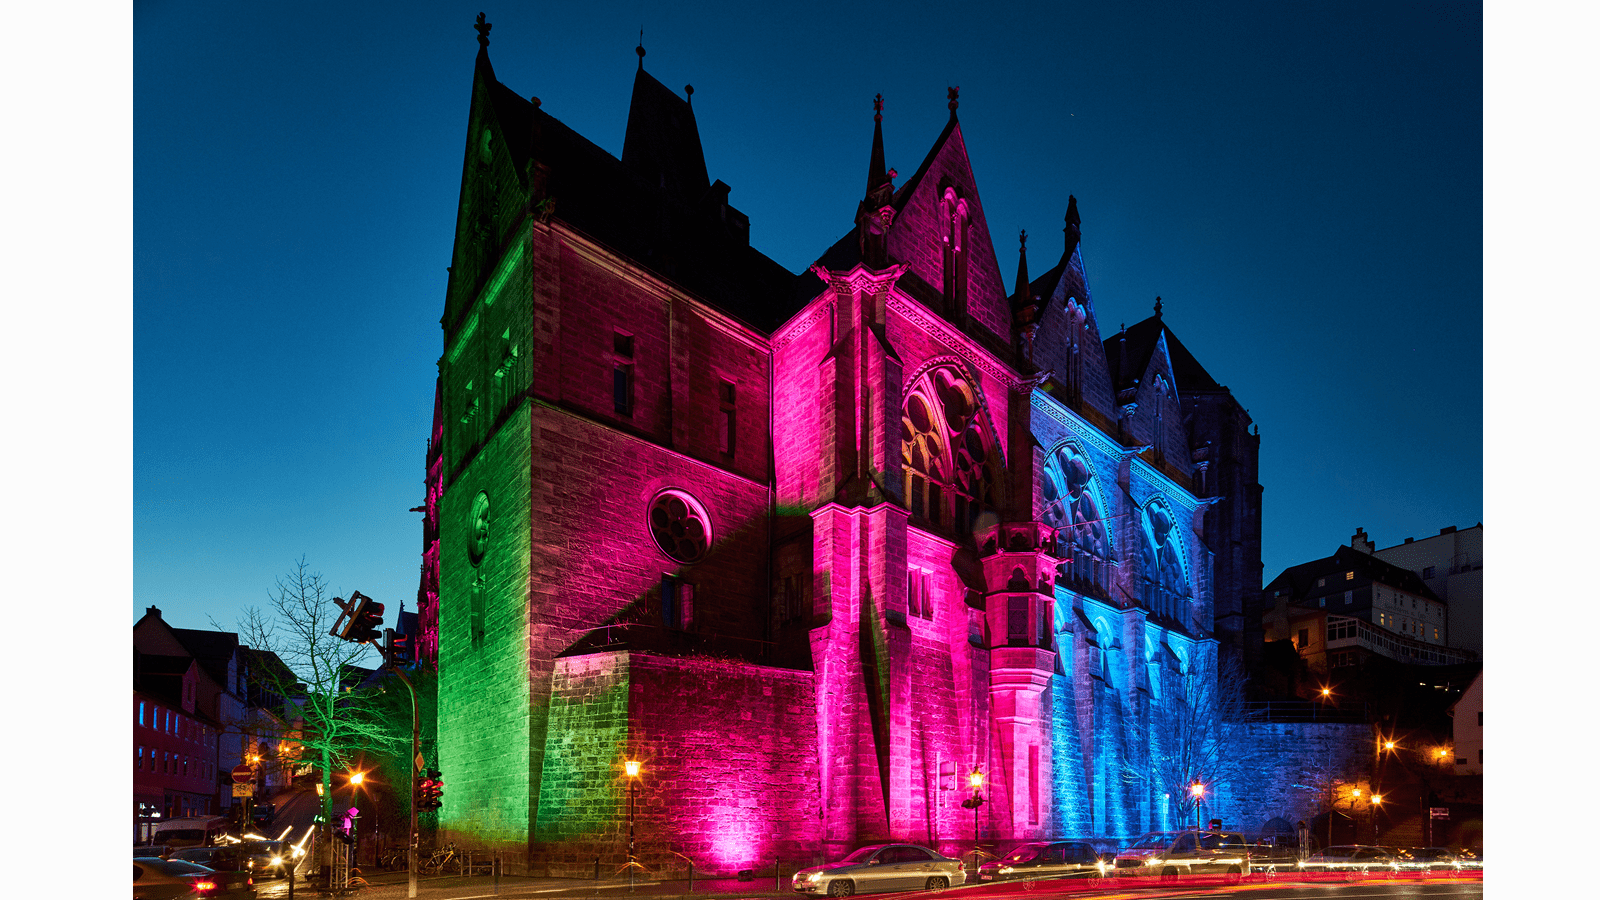 Historic University in Marburg, Germany, lit up in the green, purple, pink and blue colors of Rare Disease Day.